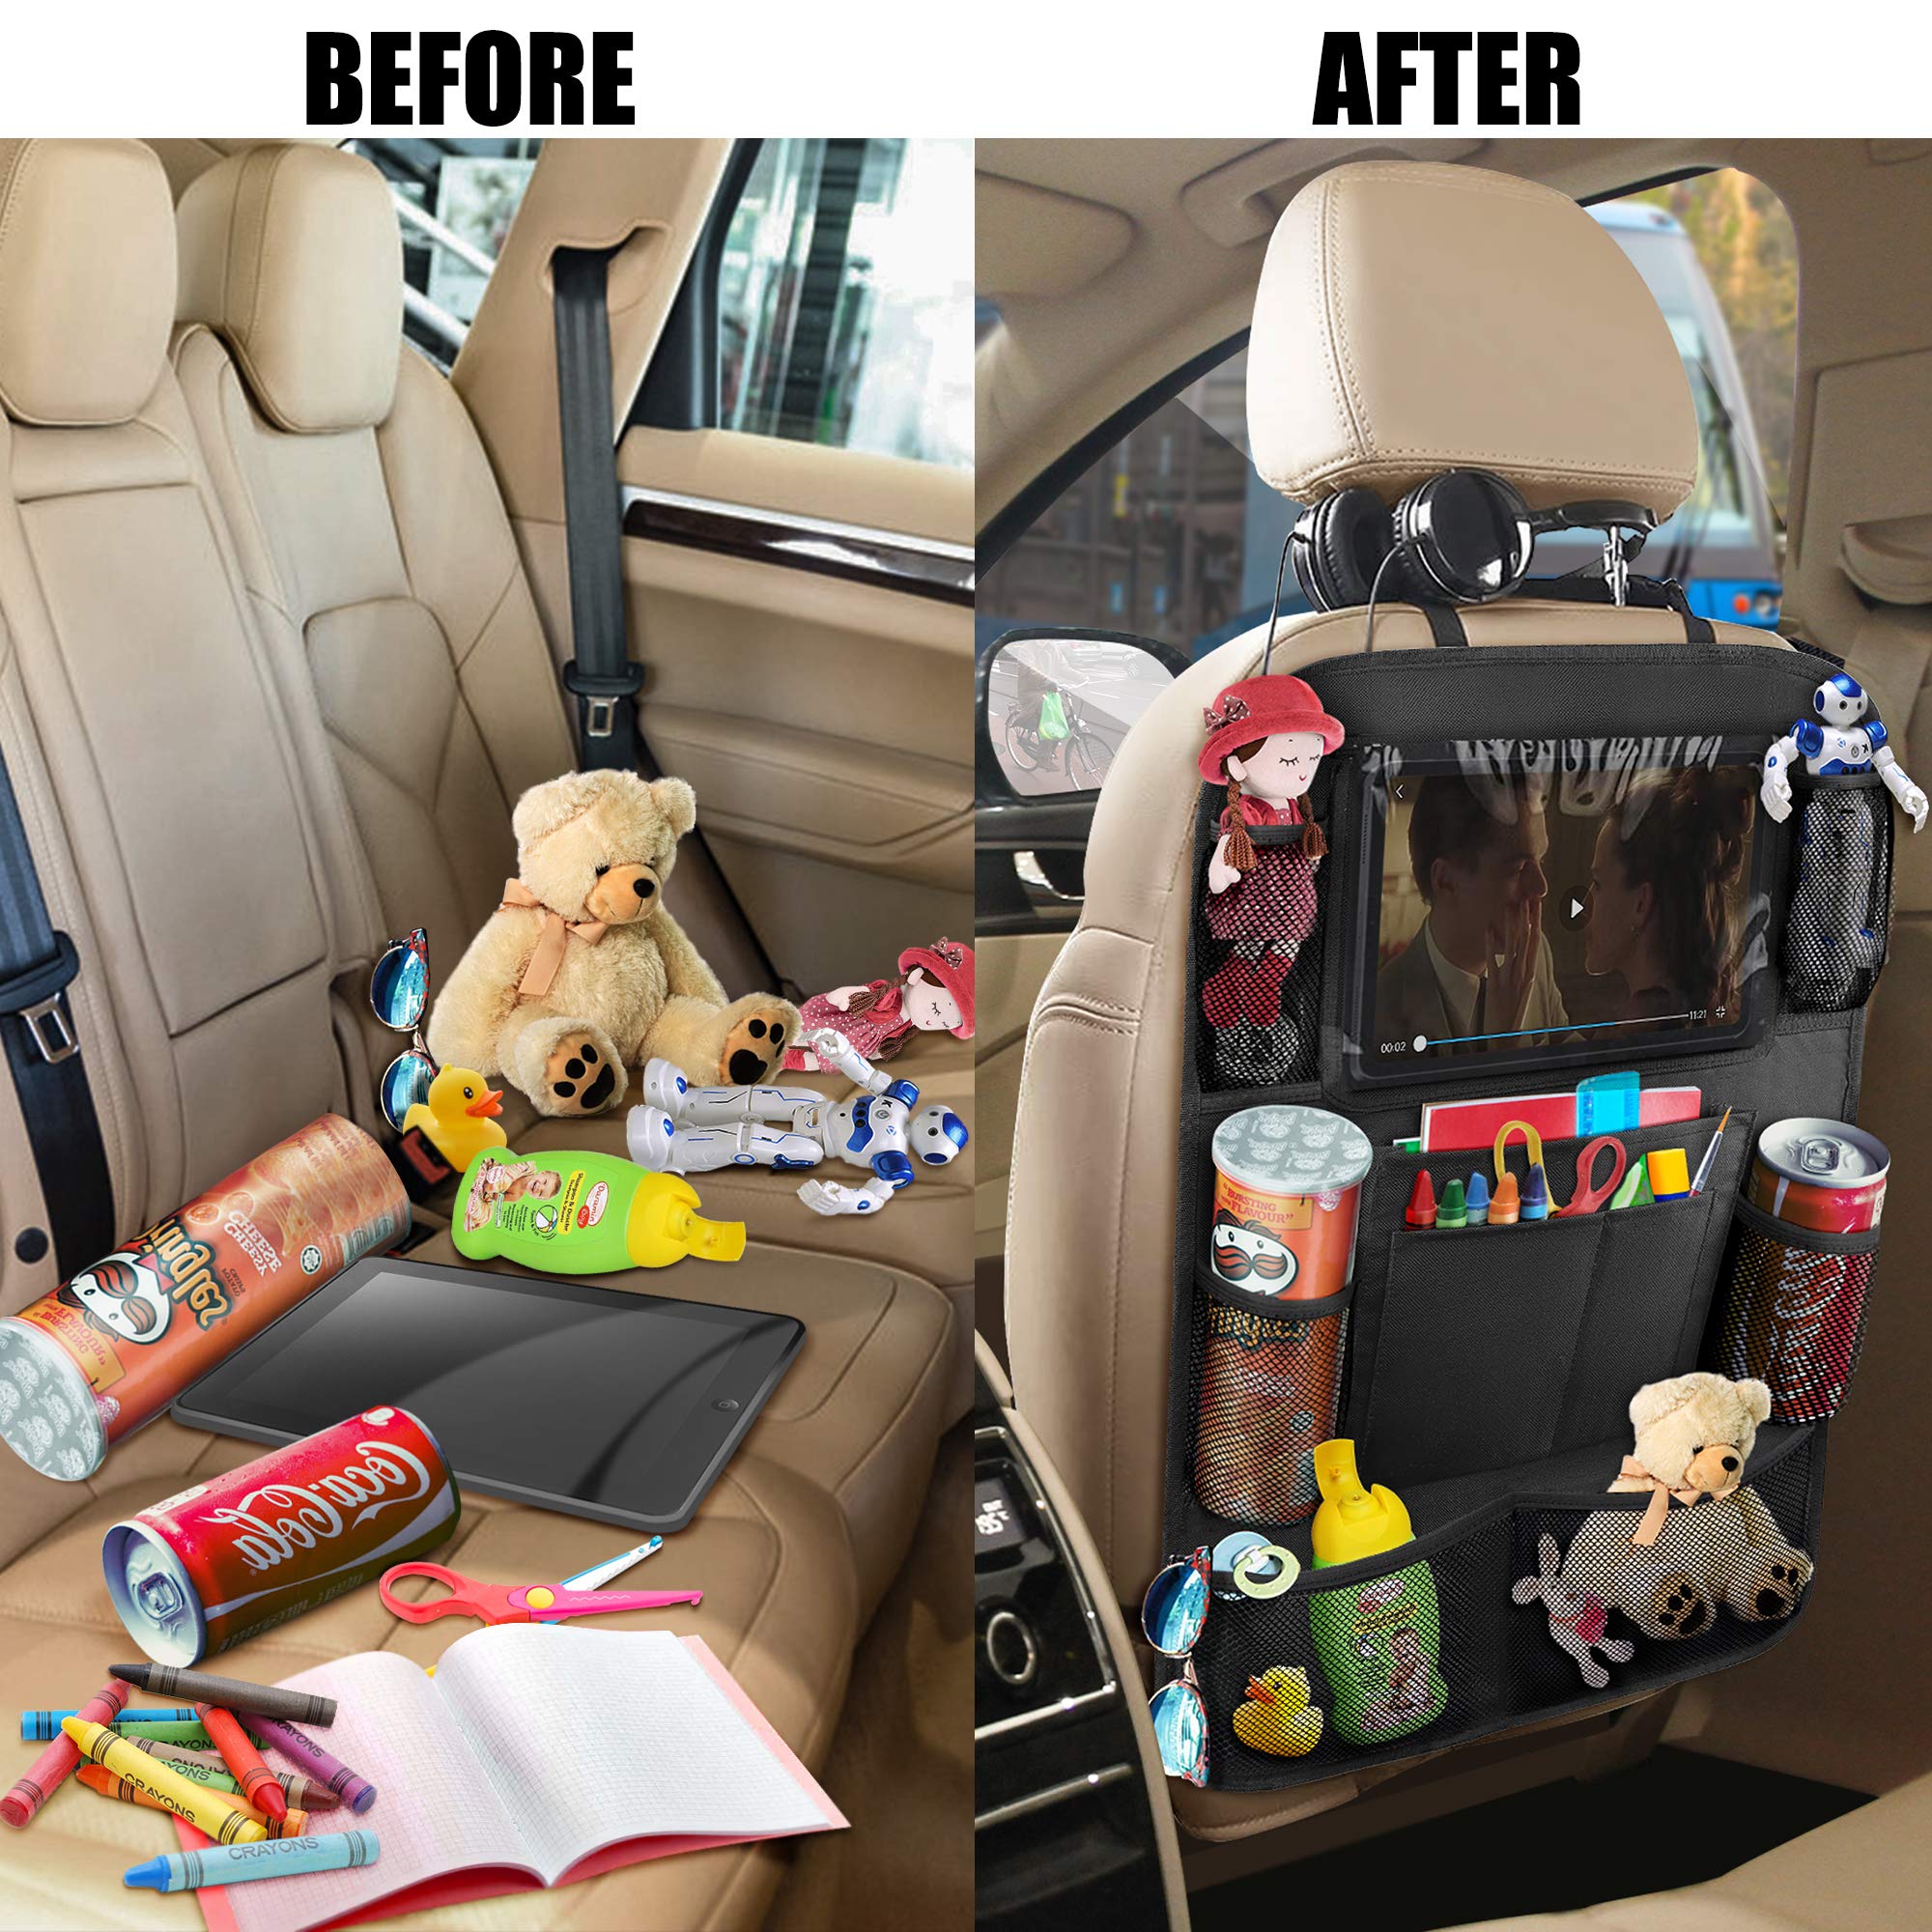 anban Car Backseat Organizer, Seat Back Protectors with 10 inch Tablet Holder + 9 Storage Pockets Kick Mats for Book Drink Toy Bottle, Travel Accessories for Kids Toddlers Black, 2 Pack